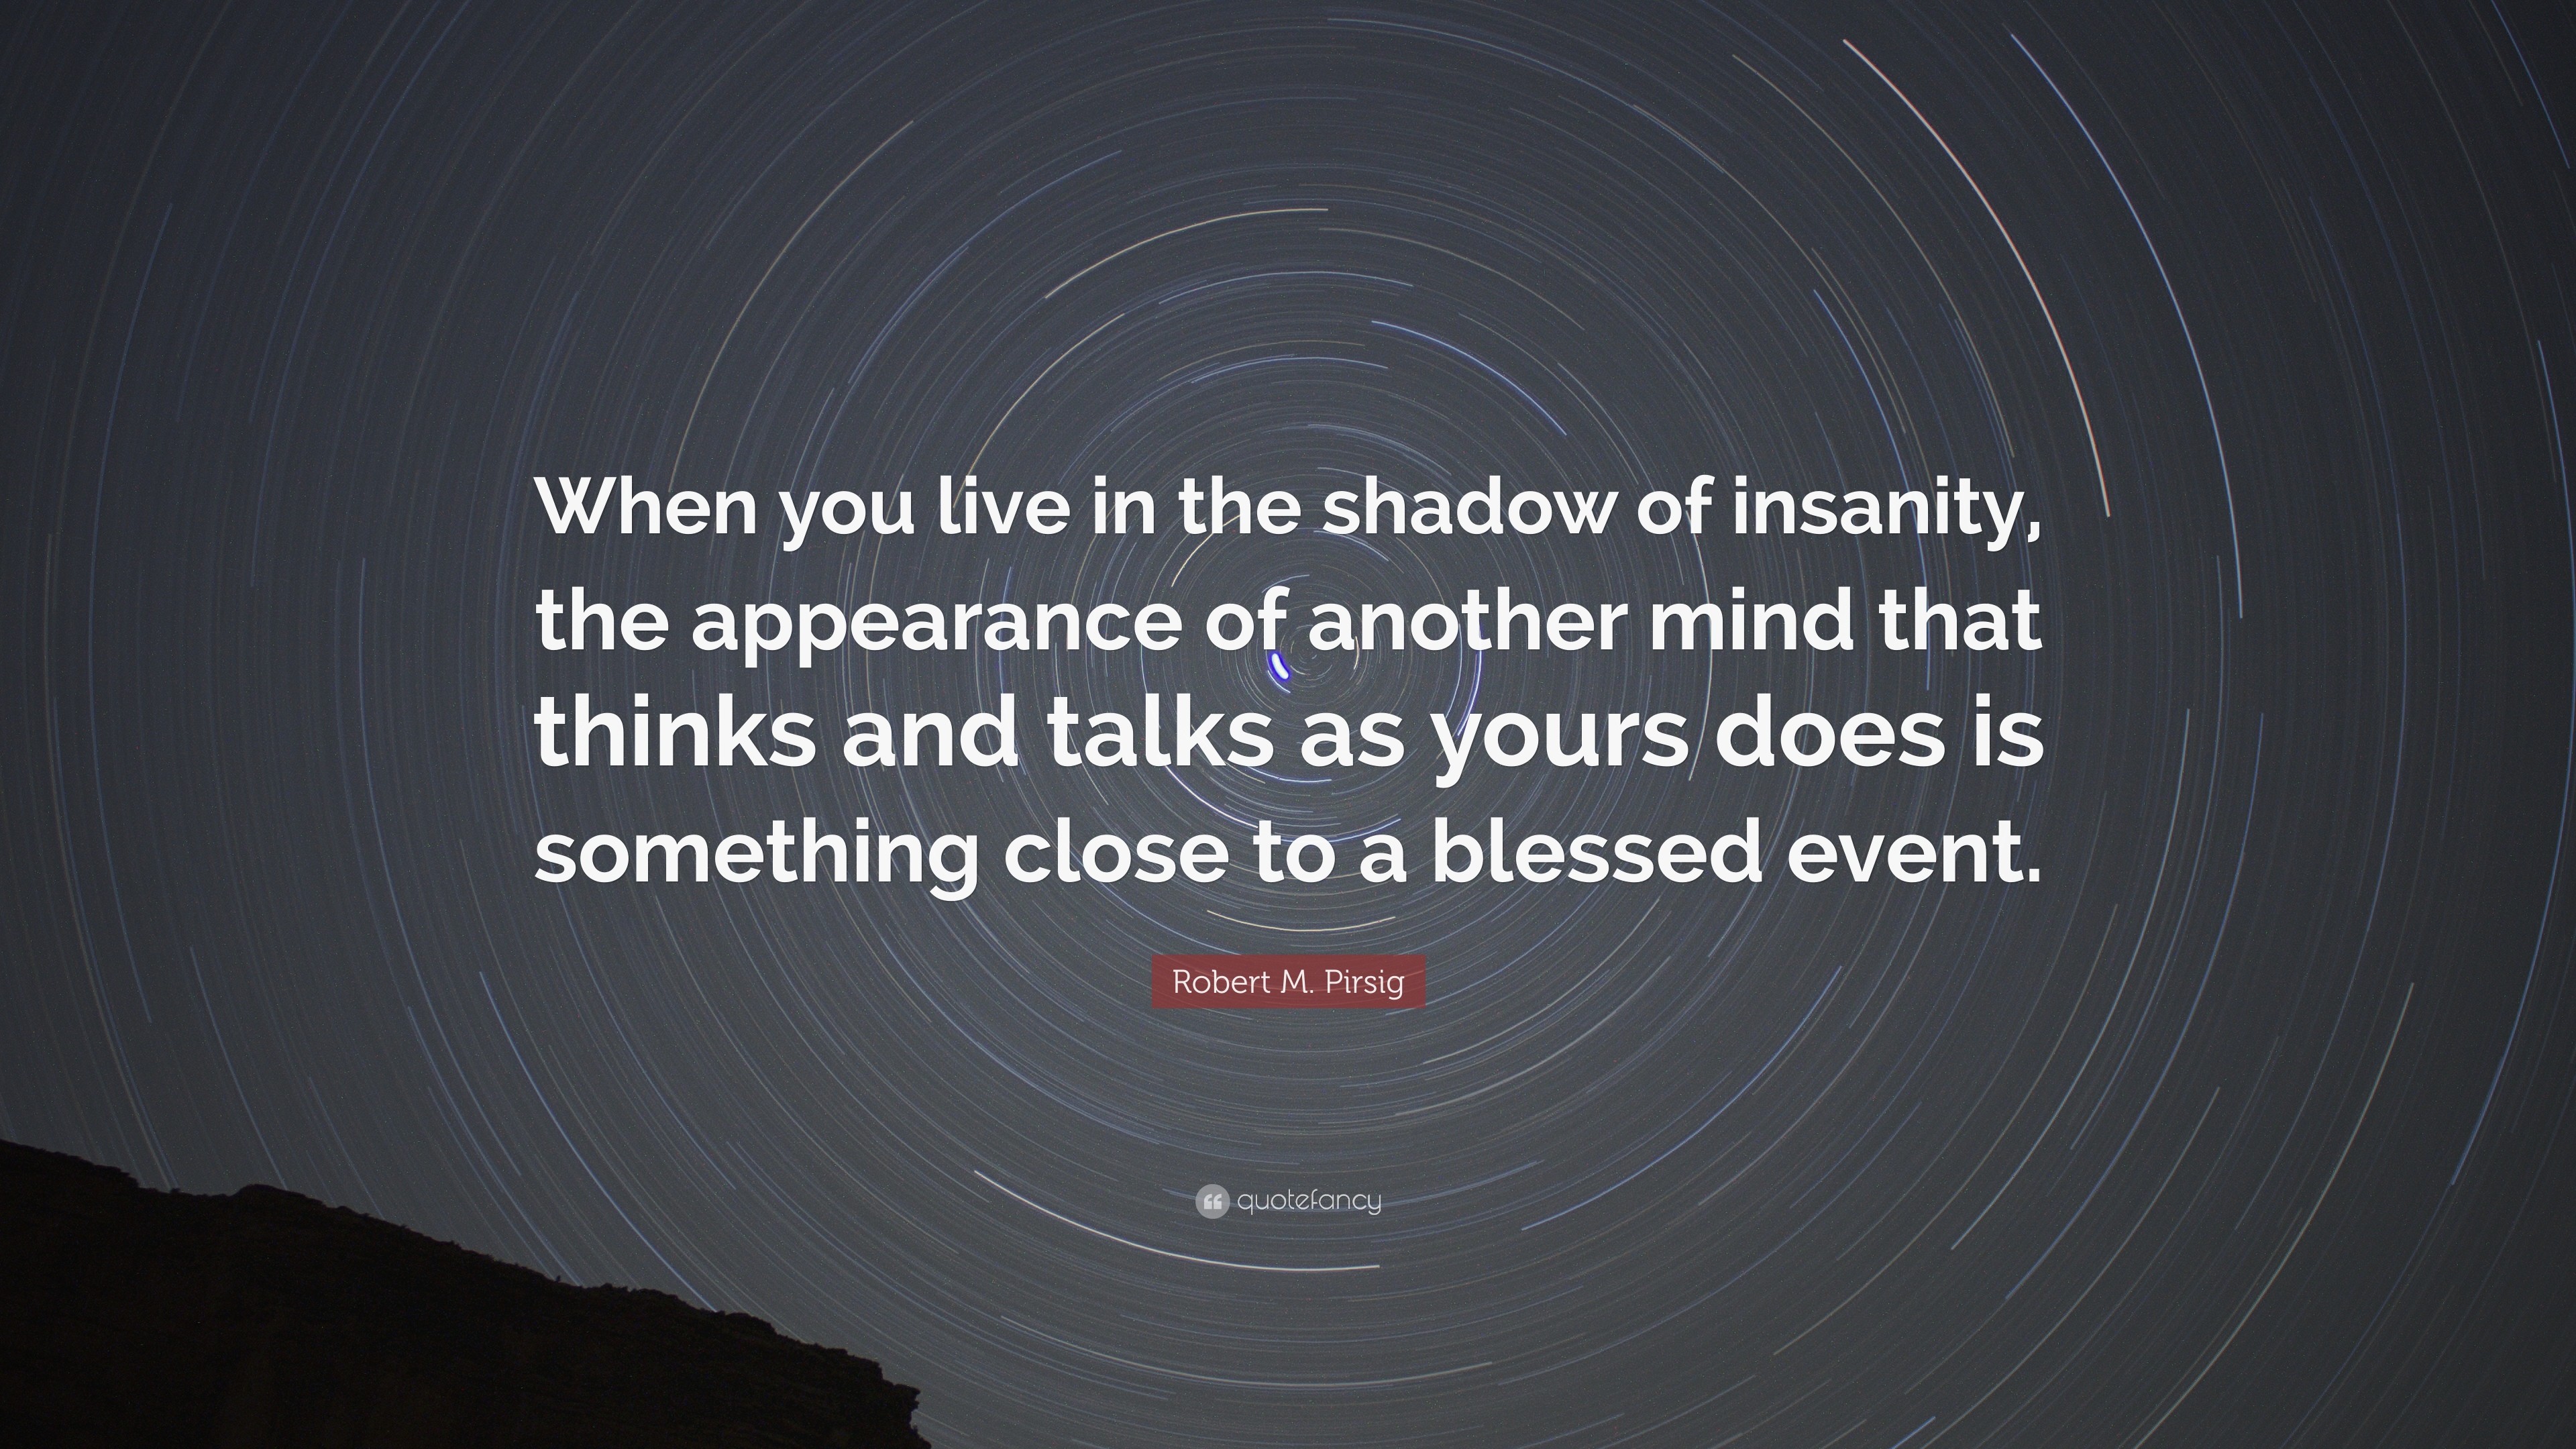 3840x2160 Robert M. Pirsig Quote: “When you live in the shadow of insanity,